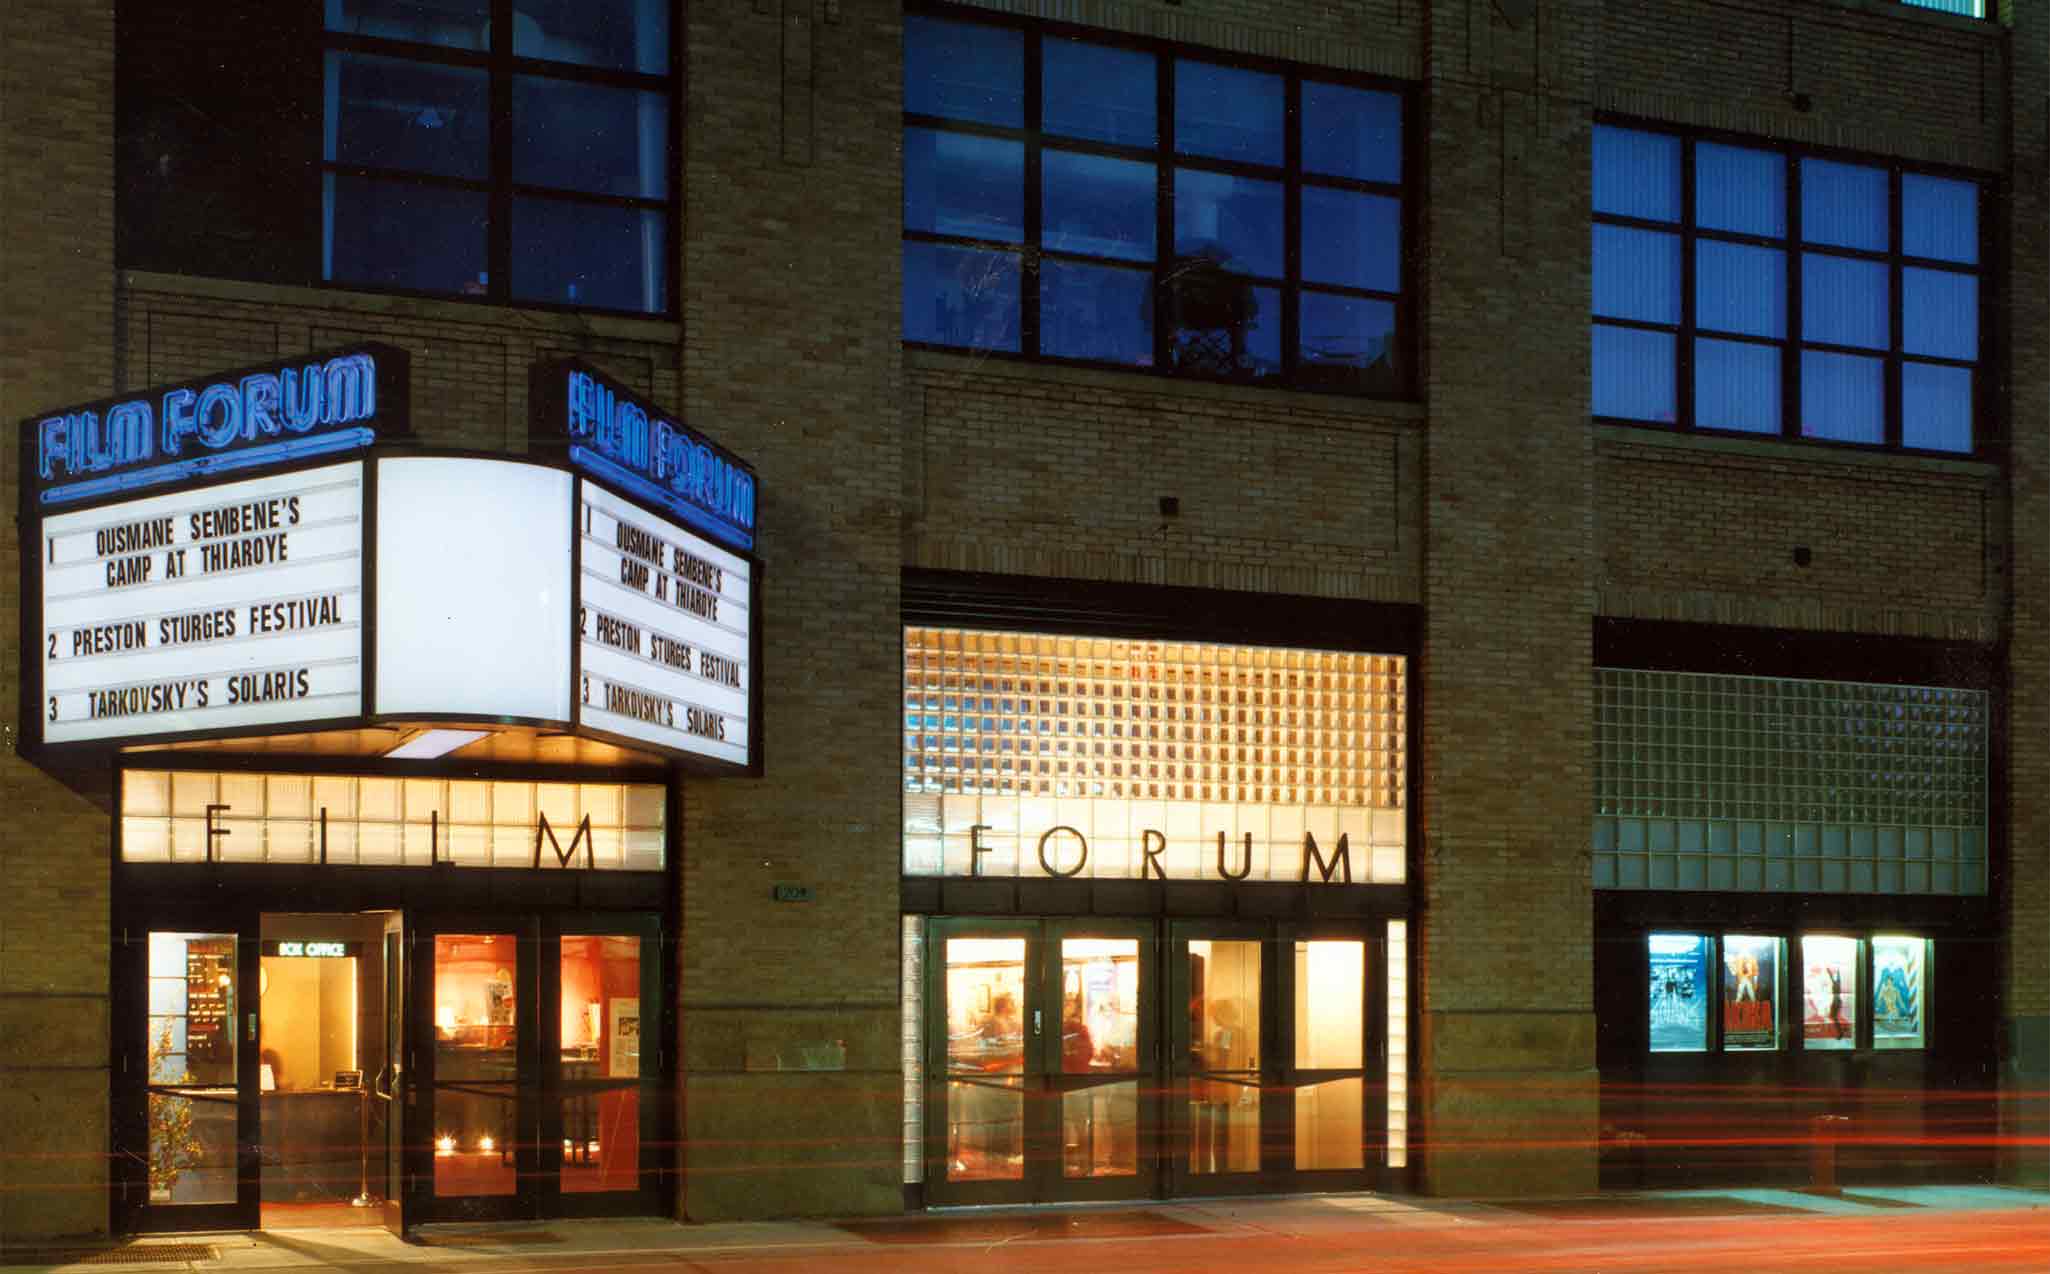 Film Forum's marquee and building, photographed at night